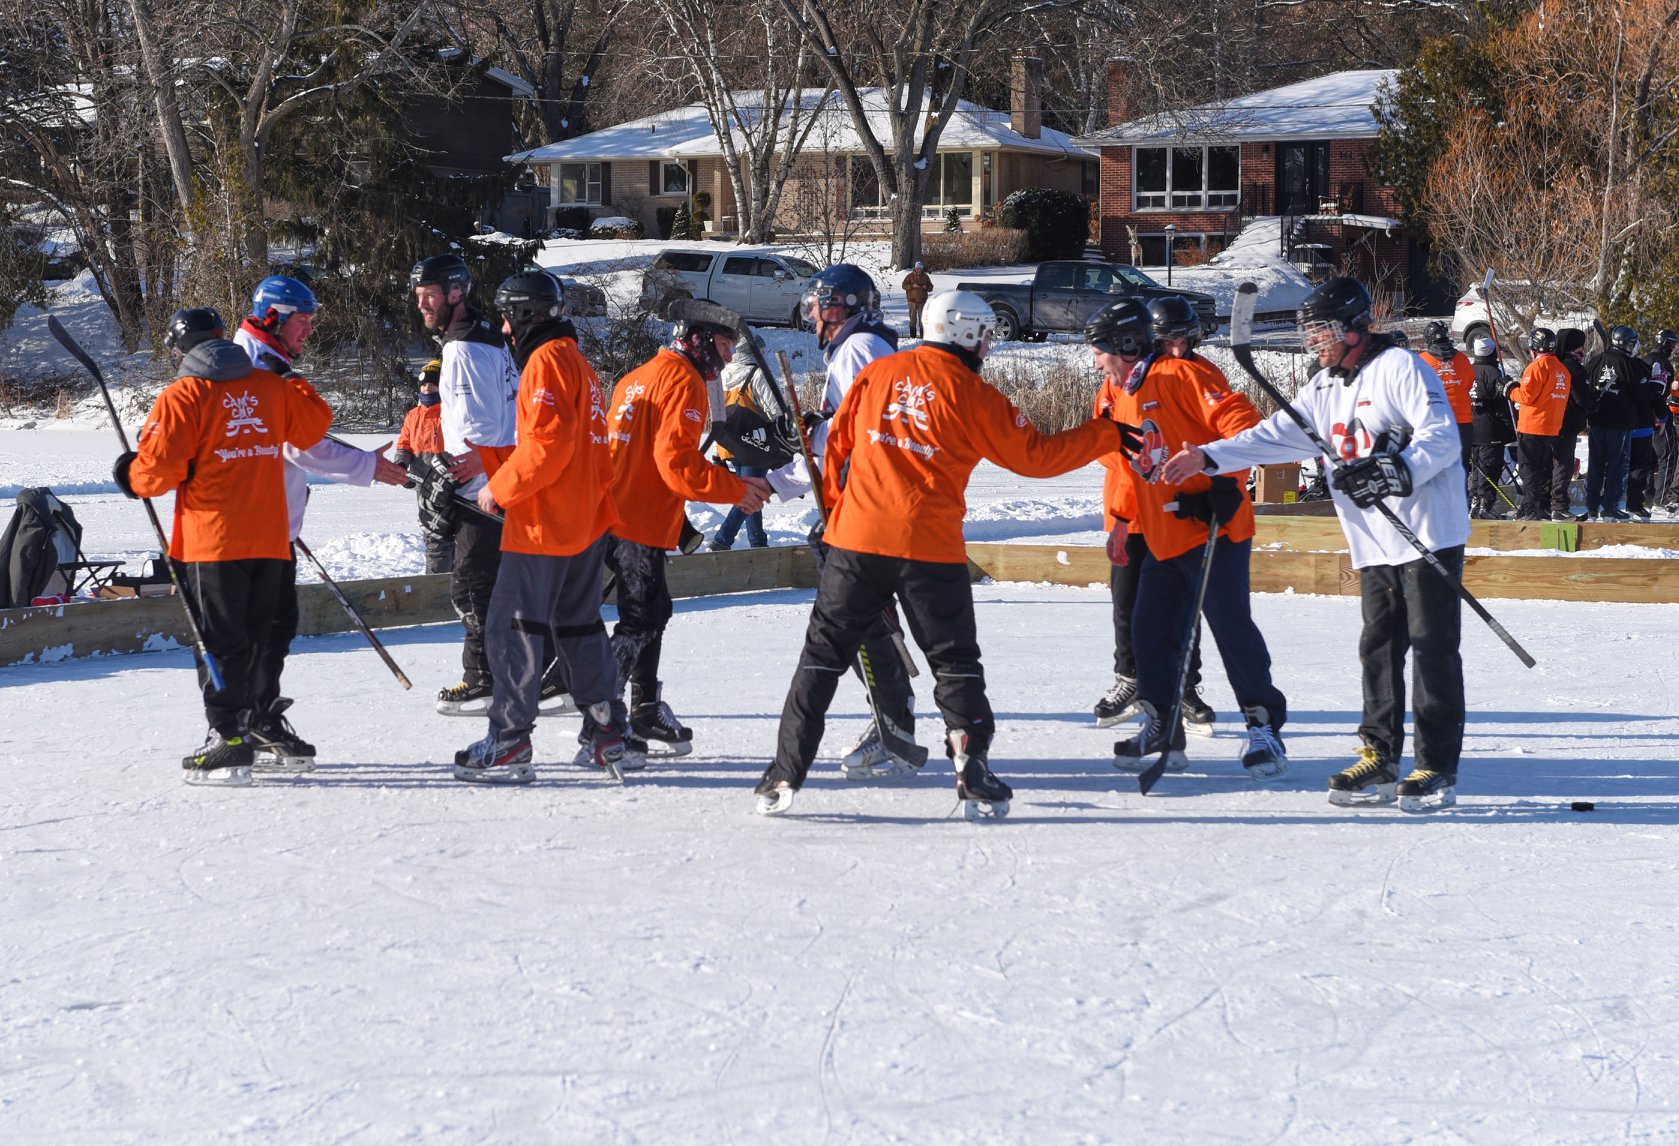 The 5th Annual Cam's Cup Pond Hockey Tournament